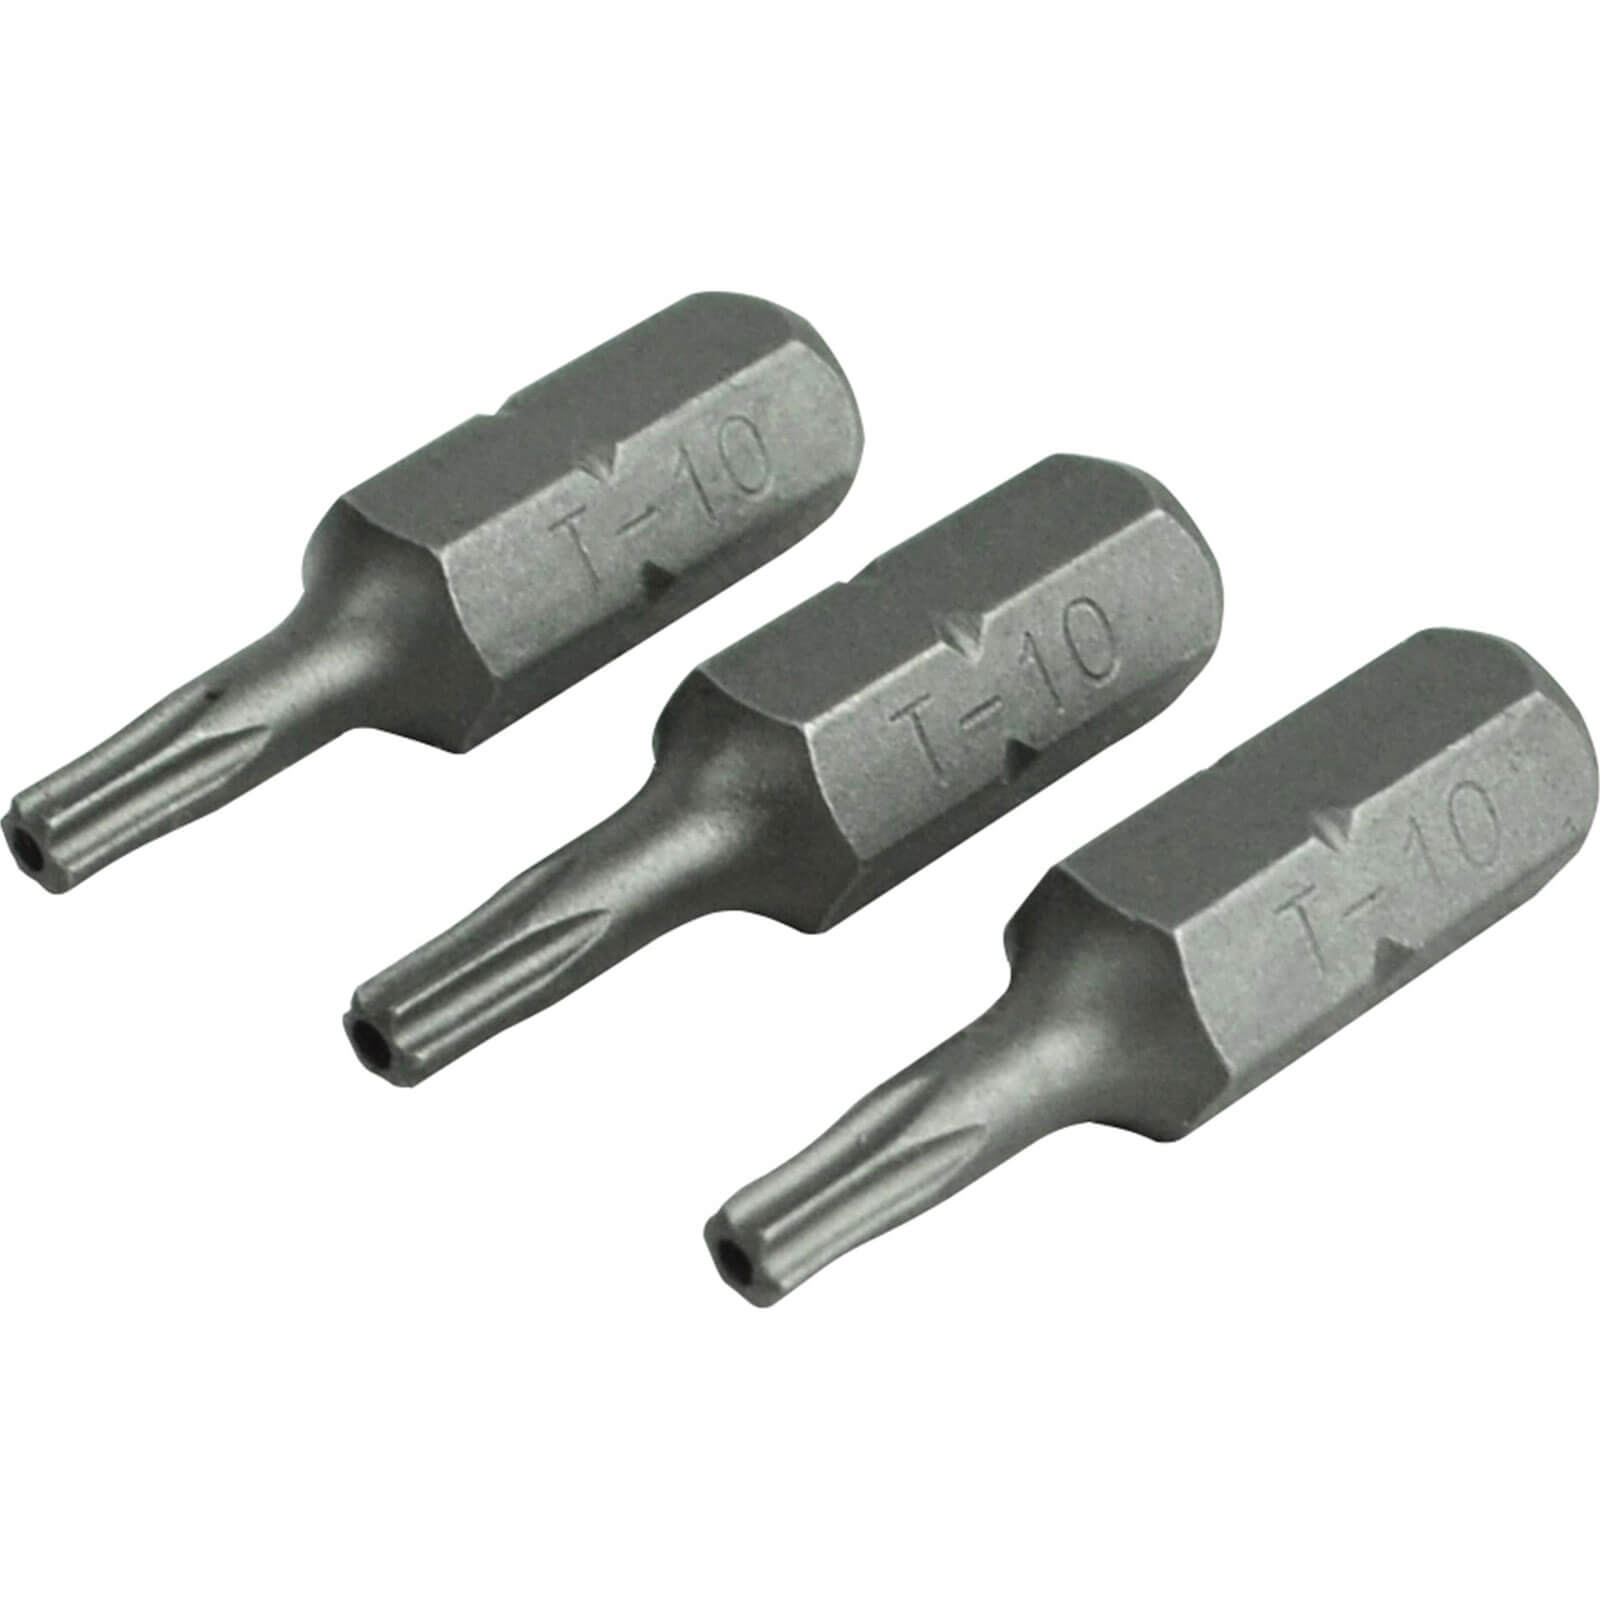 Image of Faithfull S2 Security Torx Screwdriver Bits T10 25mm Pack of 3